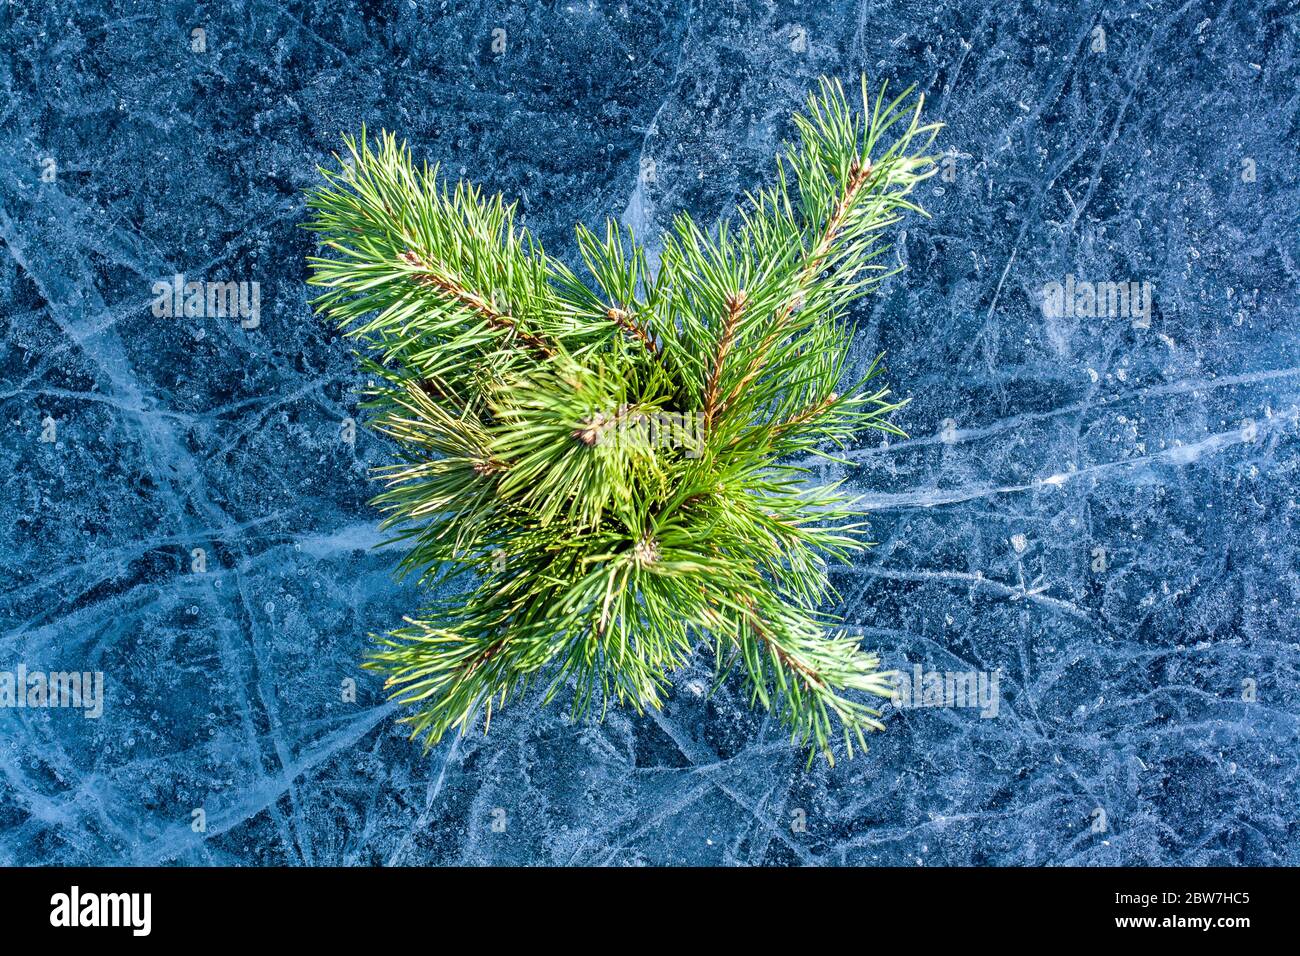 Coniferous branches on amazing ice in the style of a flat lay. Ice with cracks and patterns. Pine branches for winter decoration. Horizontal. Stock Photo